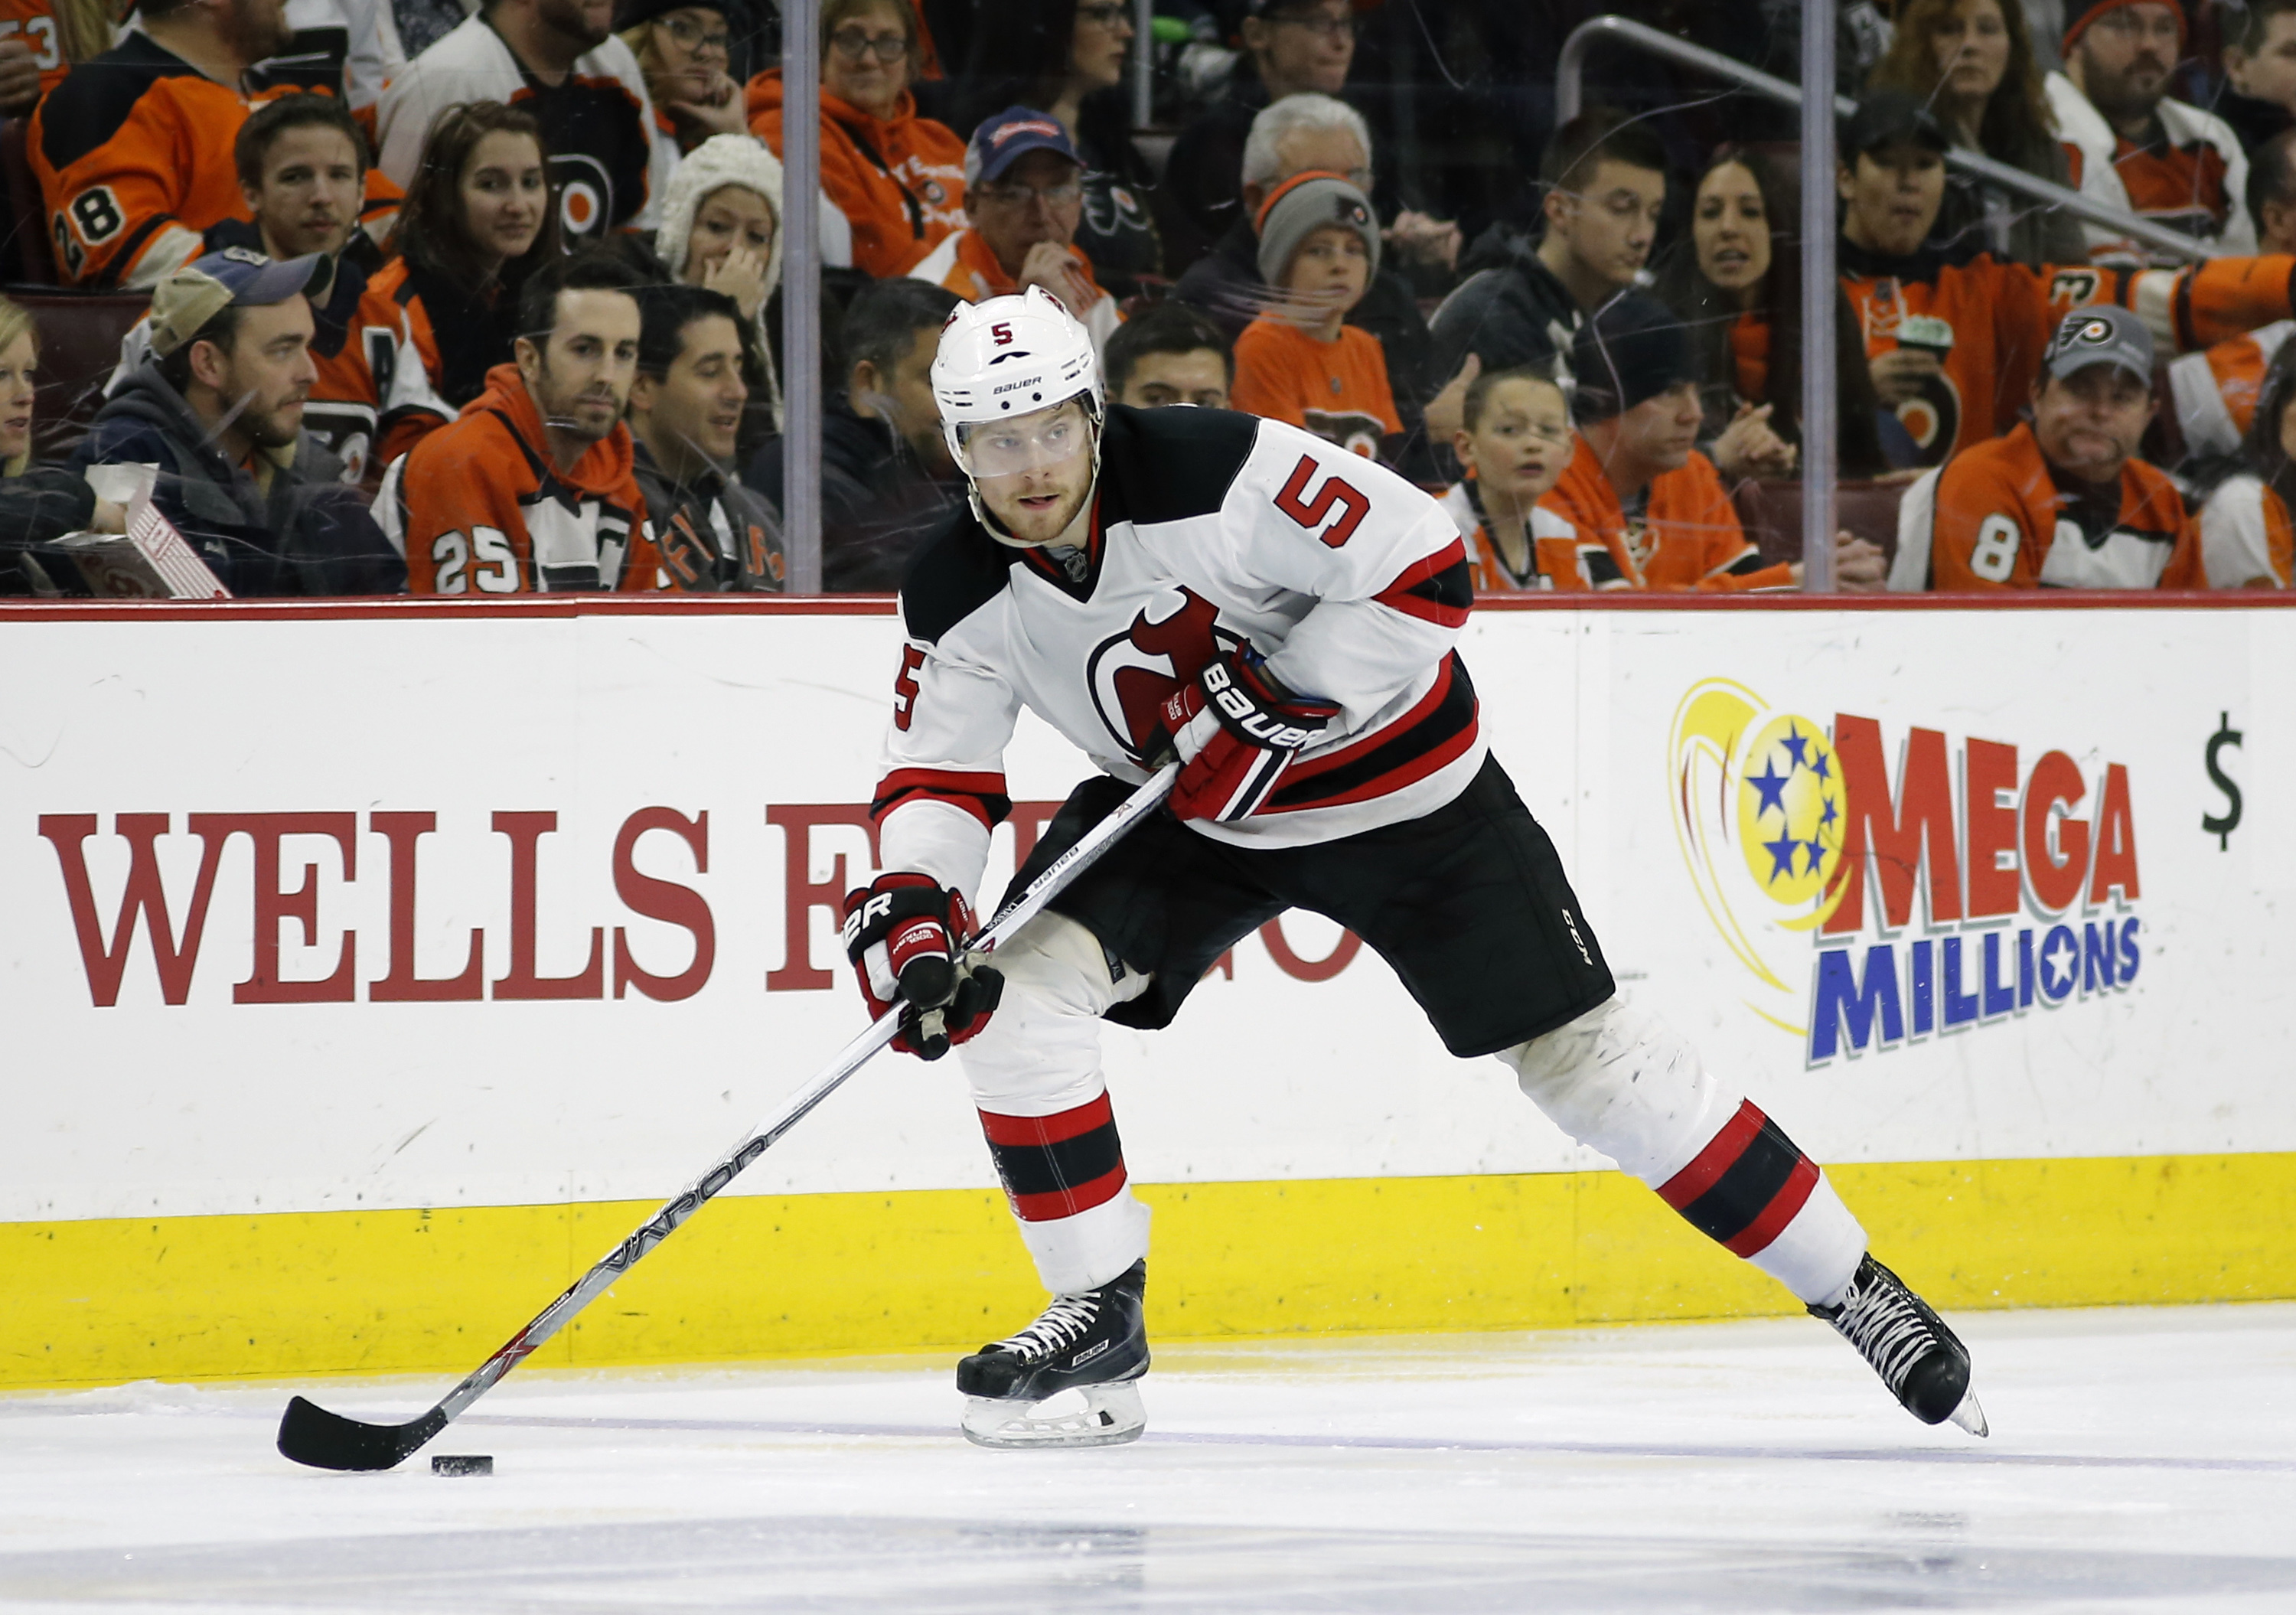 Devils acquire former No. 1 overall pick Taylor Hall from the